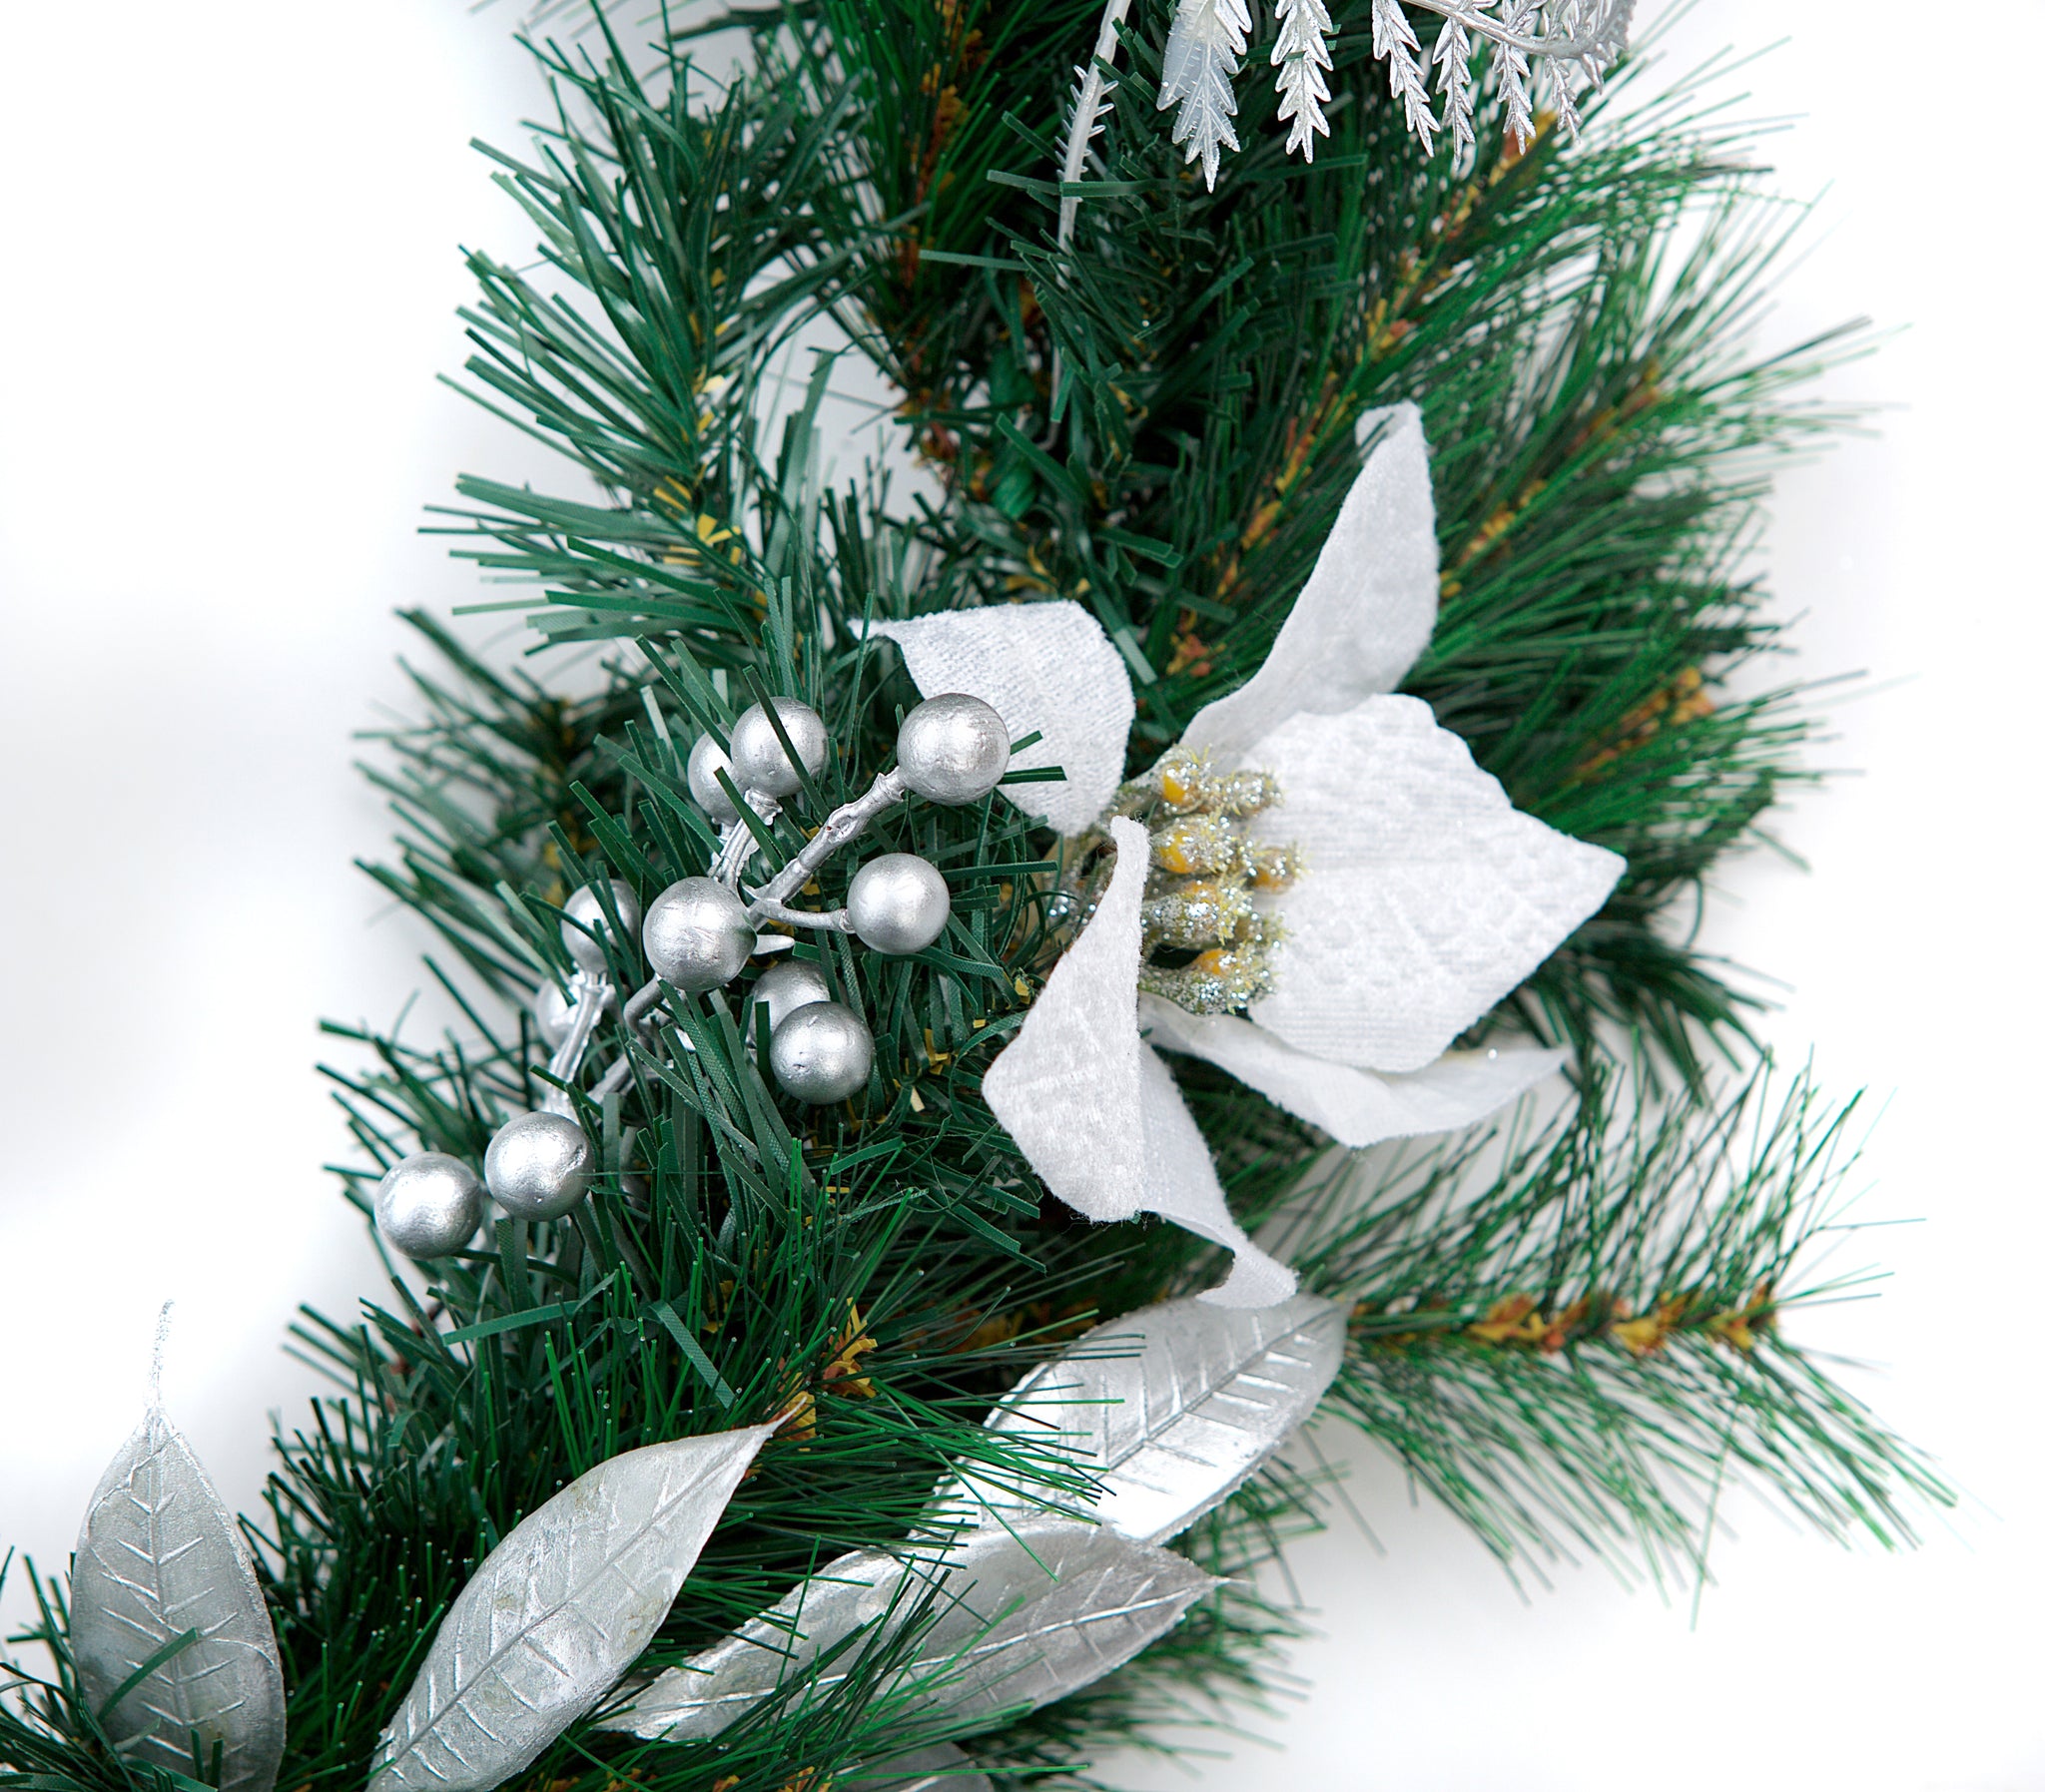 6ft - 9ft or 12ft White/Silver Christmas Garland - Optional Lights